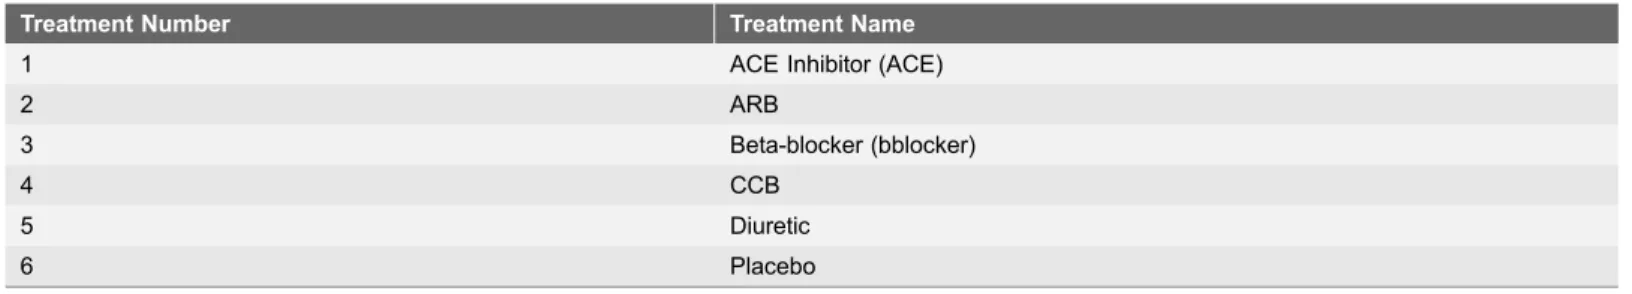 Table 5. List of Treatment Reference Numbers for Diabetes Data.